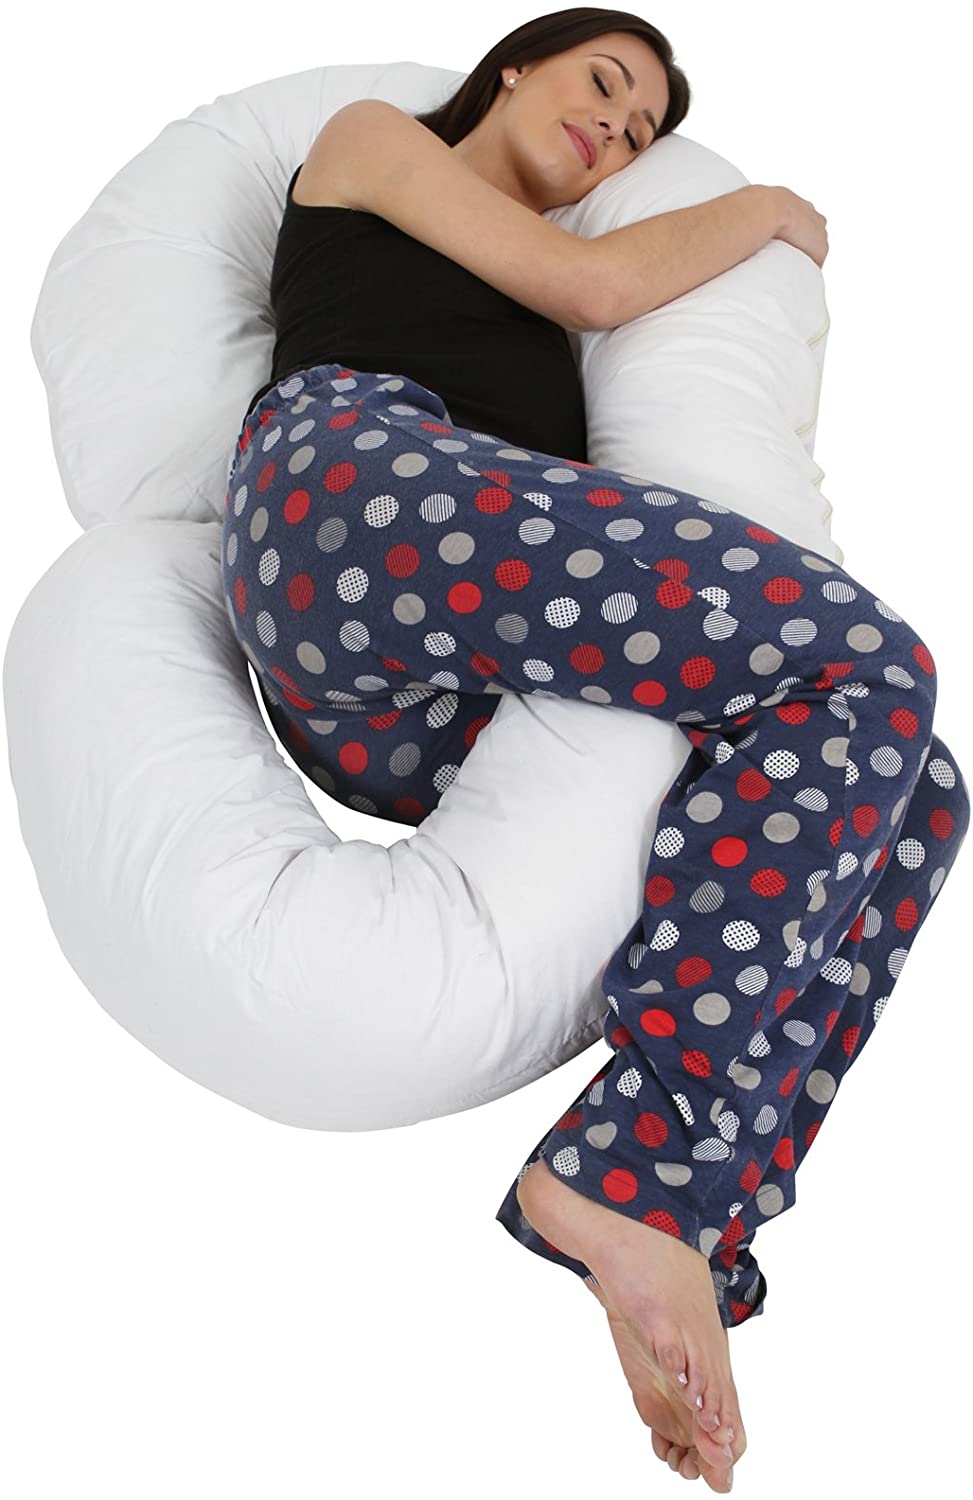 Body Support Maternity G Pillow